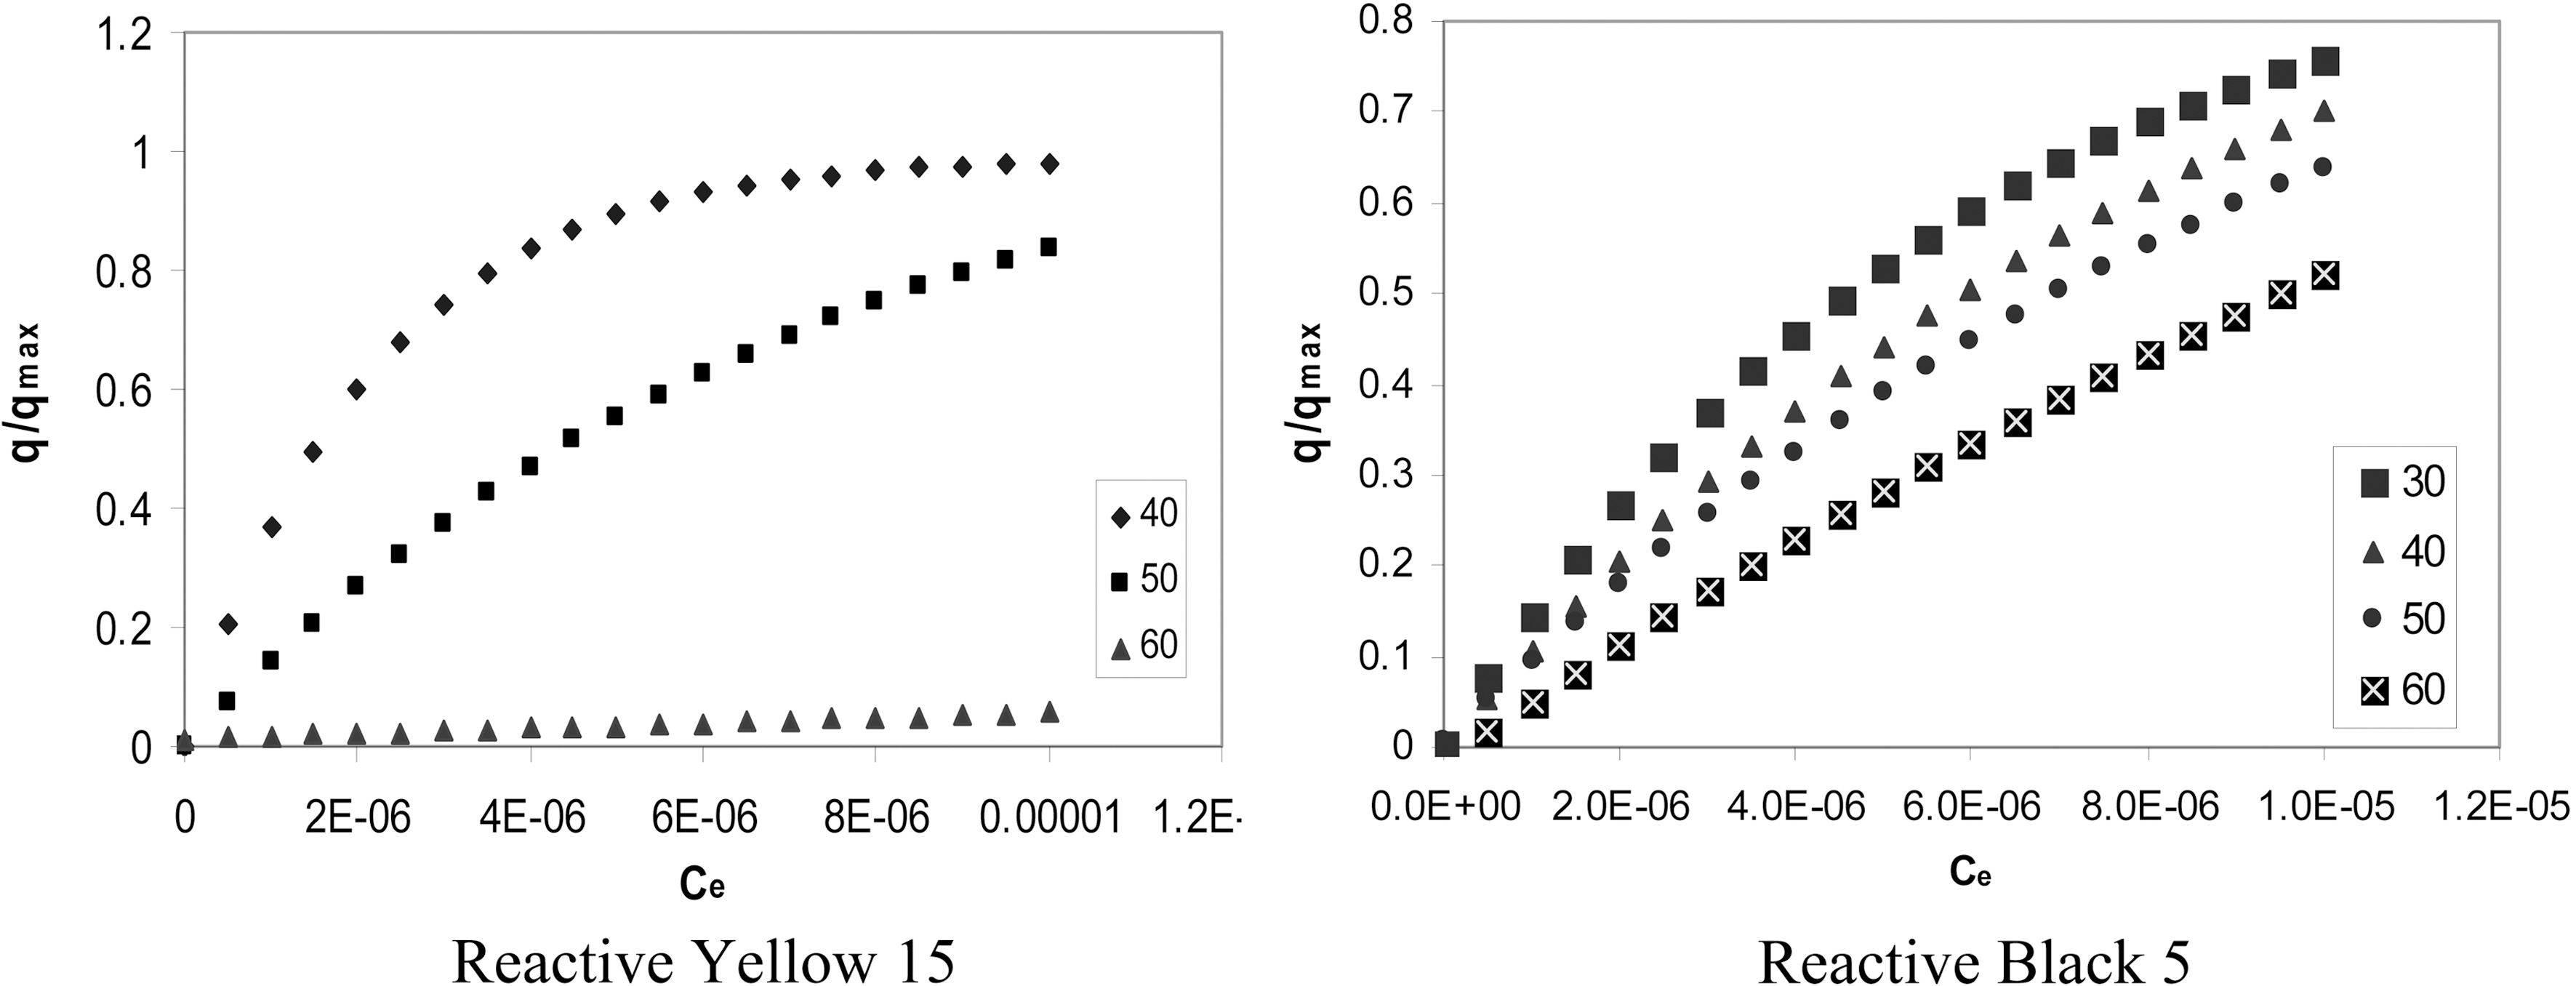 Effect of temperature on the adsorption of both dyes (values in the box is in oC).